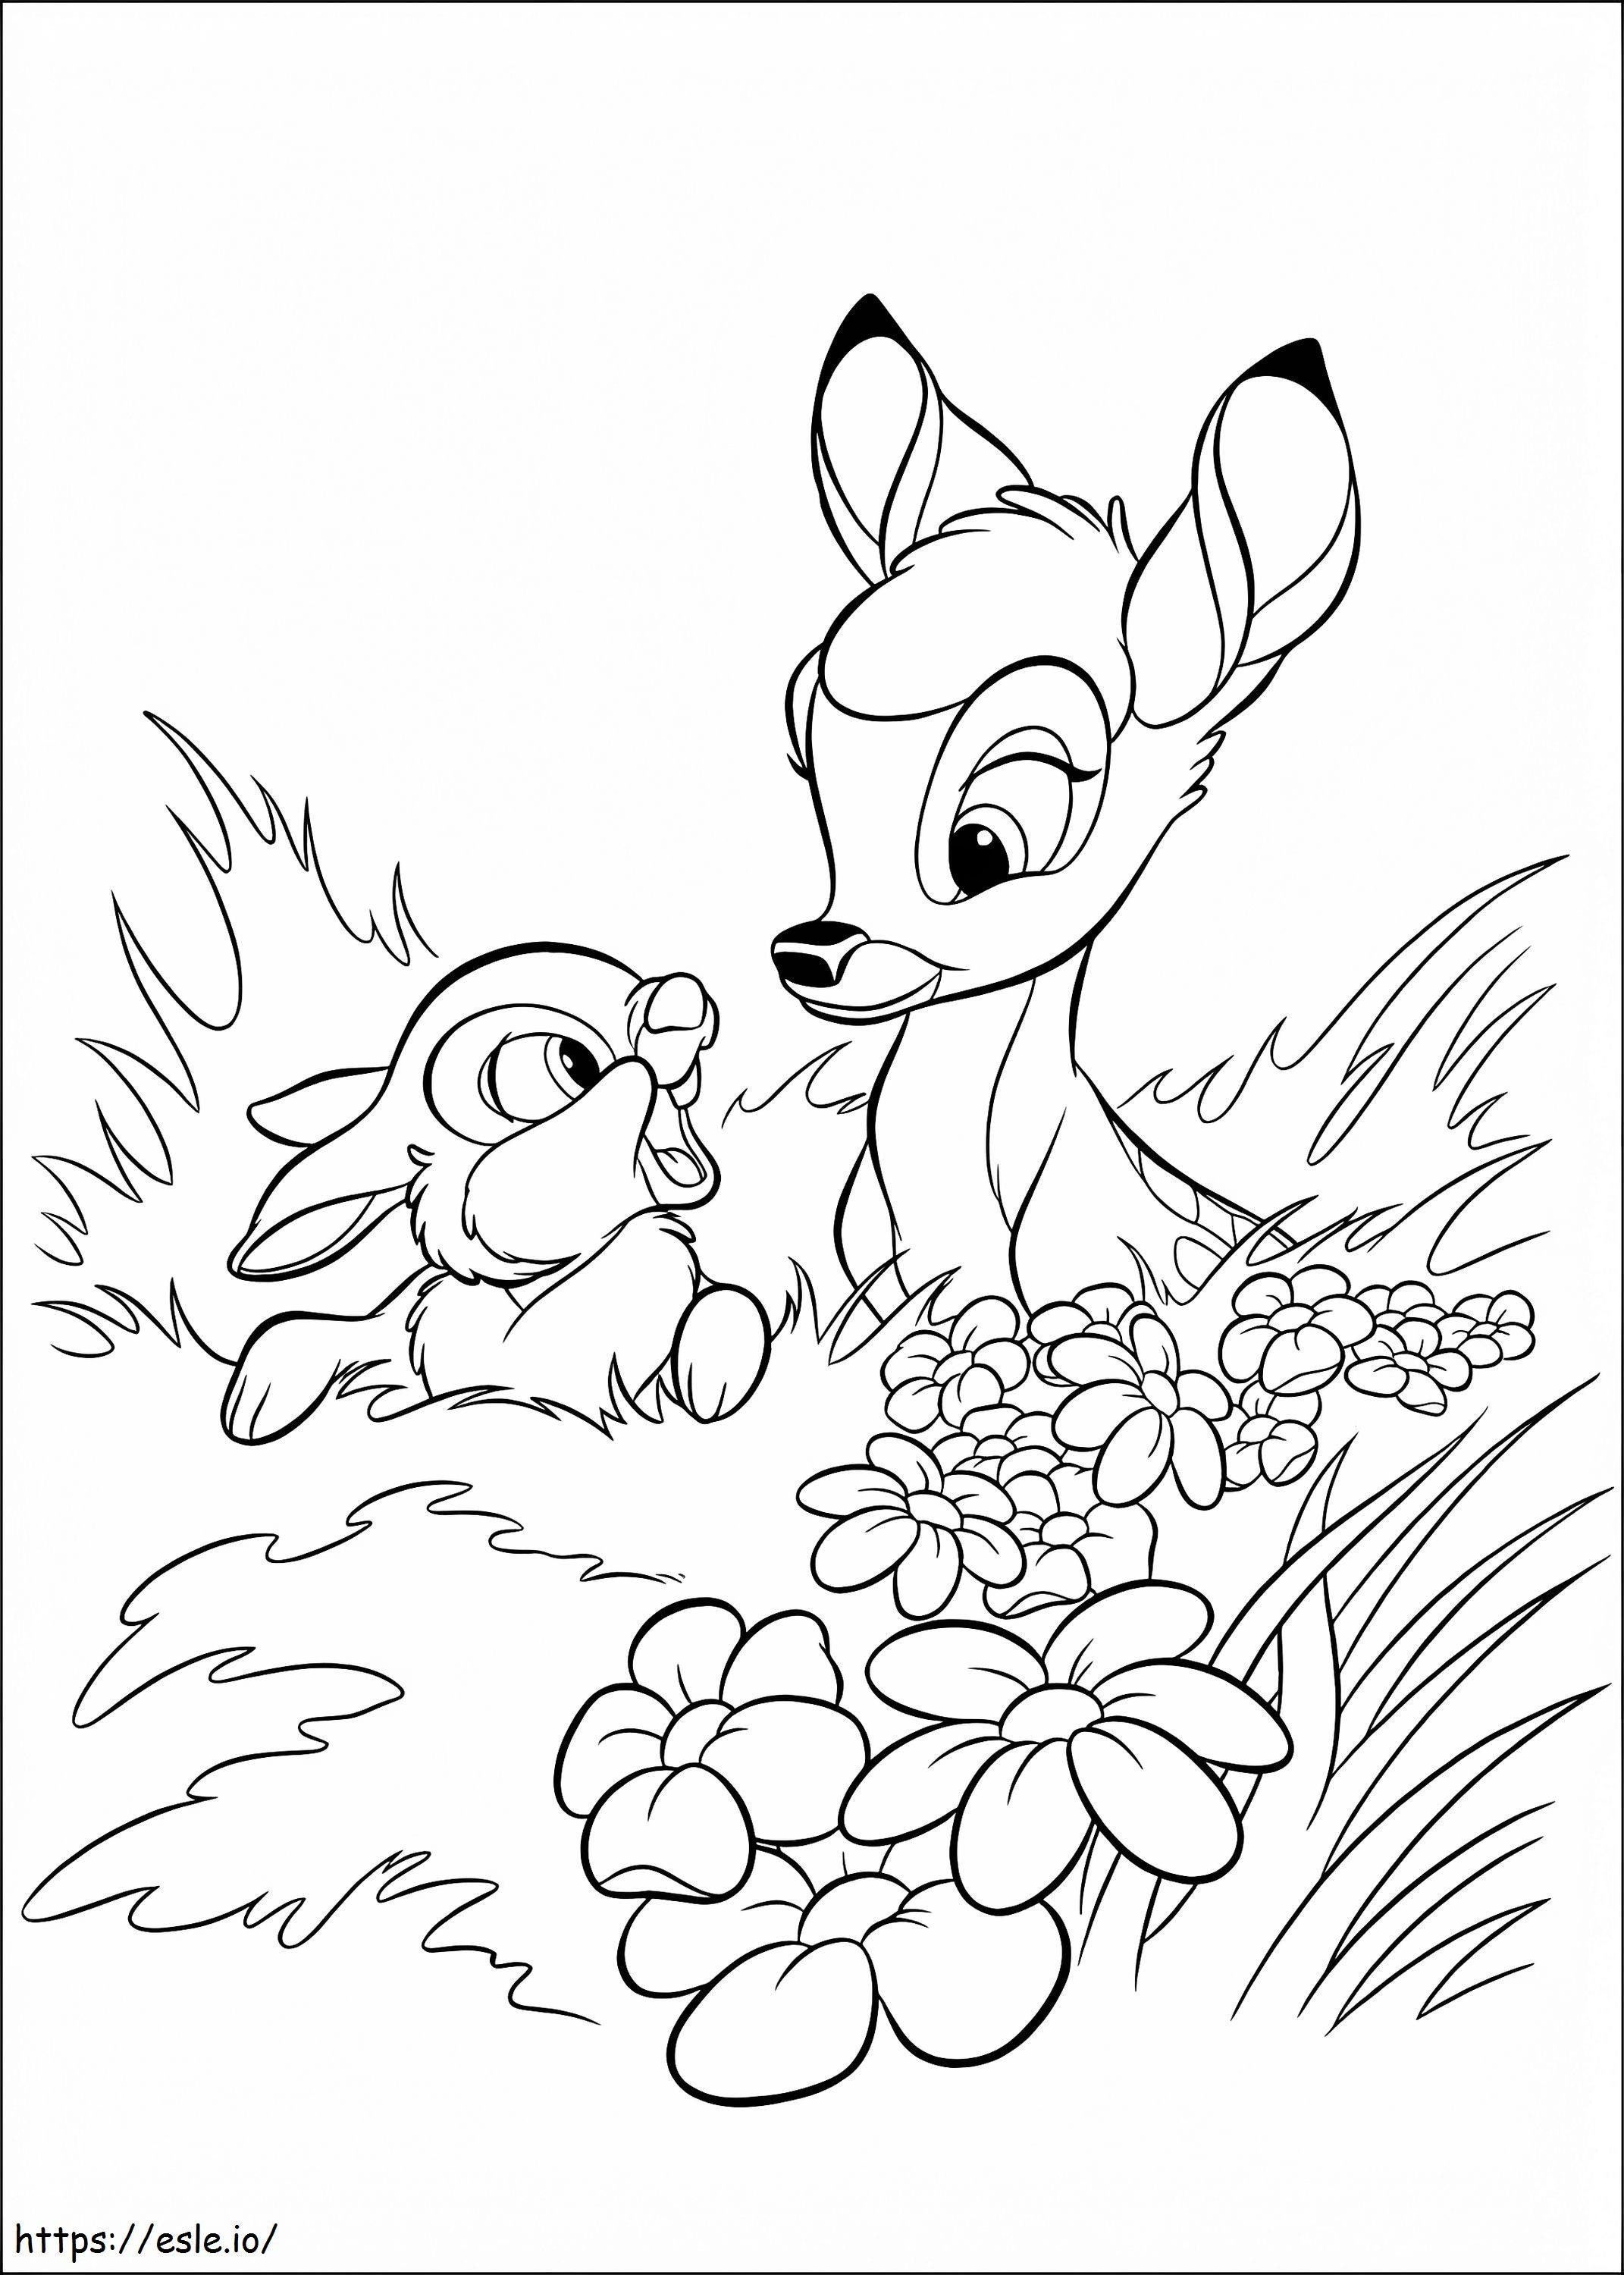 1533701343 Bambi And Thumper In Bush A4 coloring page